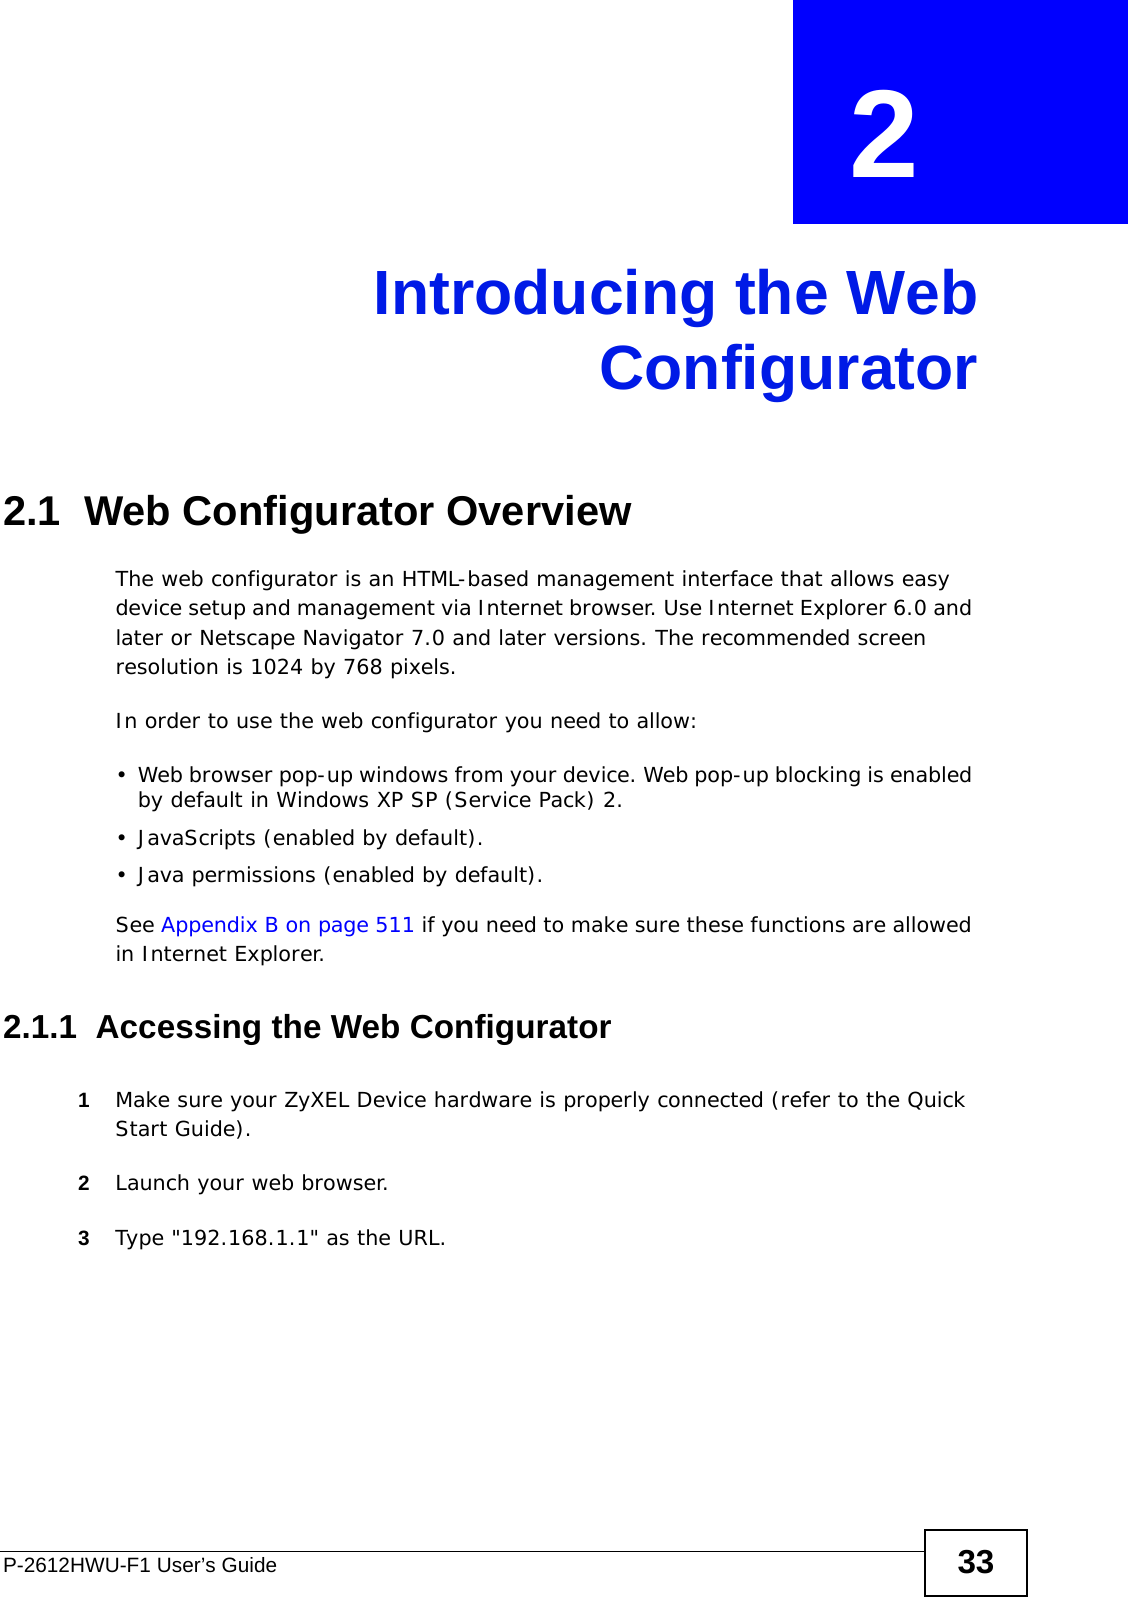 P-2612HWU-F1 User’s Guide 33CHAPTER  2 Introducing the WebConfigurator2.1  Web Configurator OverviewThe web configurator is an HTML-based management interface that allows easy device setup and management via Internet browser. Use Internet Explorer 6.0 and later or Netscape Navigator 7.0 and later versions. The recommended screen resolution is 1024 by 768 pixels.In order to use the web configurator you need to allow:• Web browser pop-up windows from your device. Web pop-up blocking is enabled by default in Windows XP SP (Service Pack) 2.• JavaScripts (enabled by default).• Java permissions (enabled by default).See Appendix B on page 511 if you need to make sure these functions are allowed in Internet Explorer.2.1.1  Accessing the Web Configurator1Make sure your ZyXEL Device hardware is properly connected (refer to the Quick Start Guide).2Launch your web browser.3Type &quot;192.168.1.1&quot; as the URL.